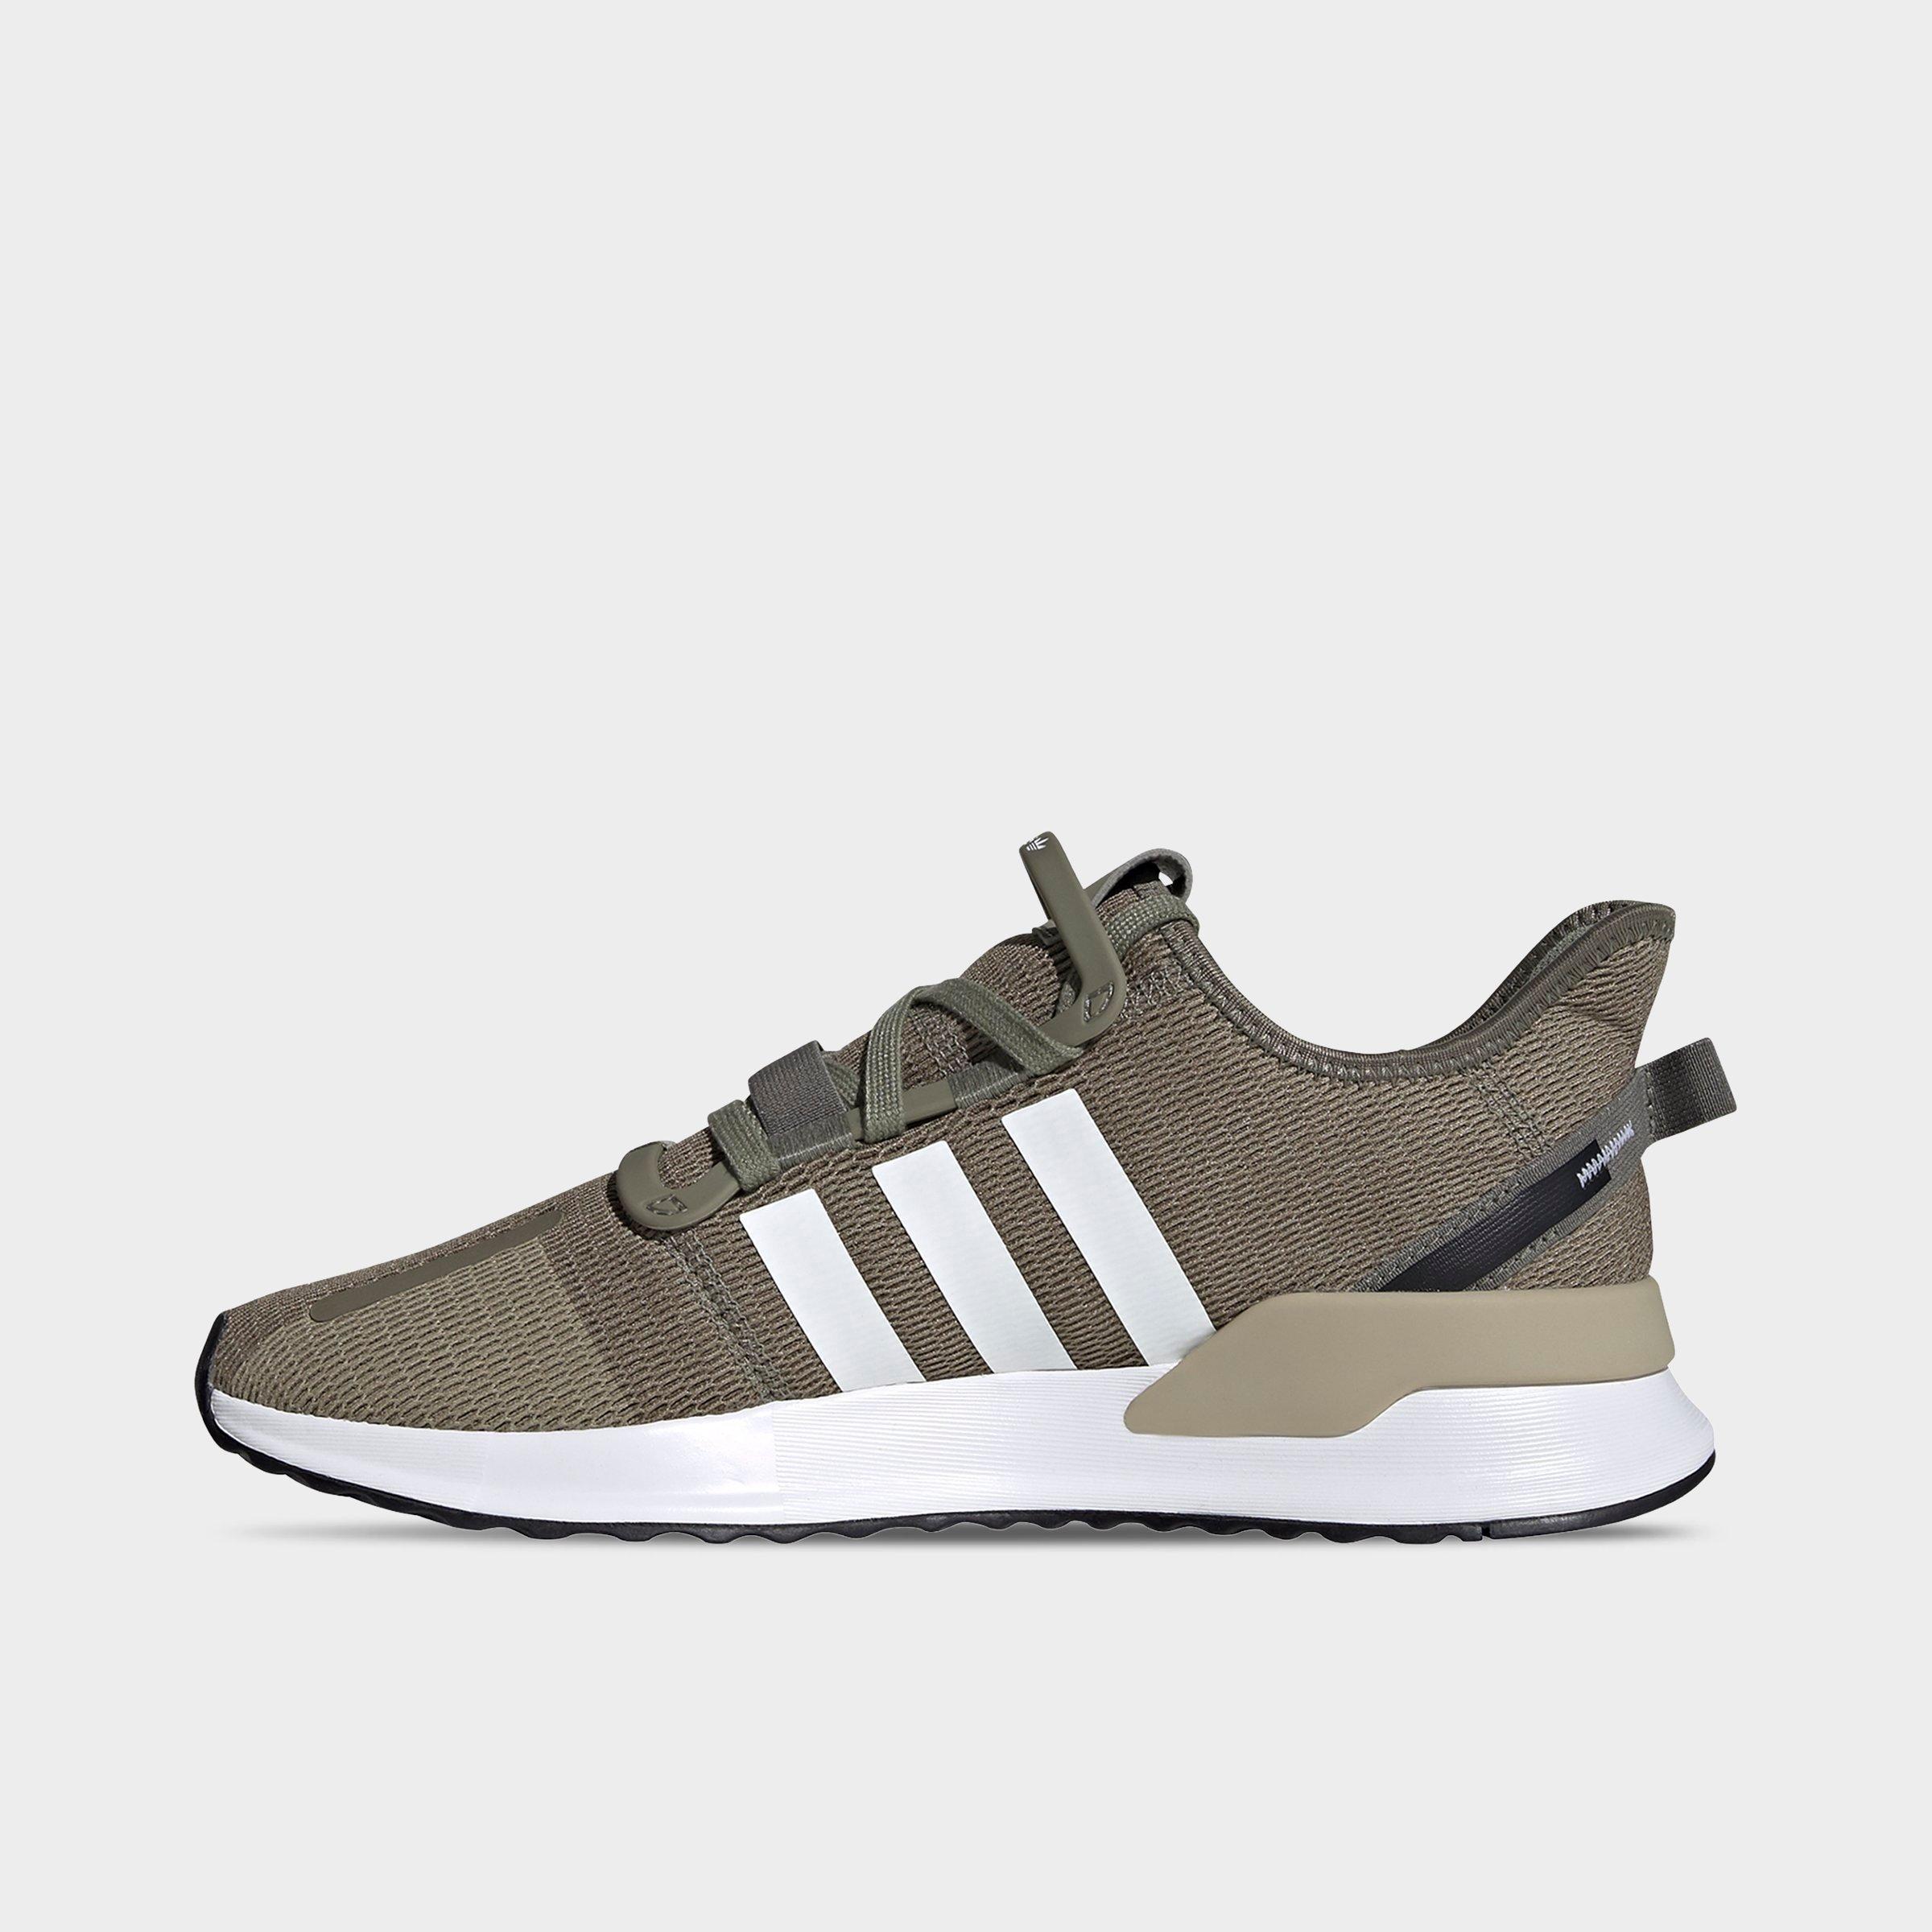 adidas green casual shoes